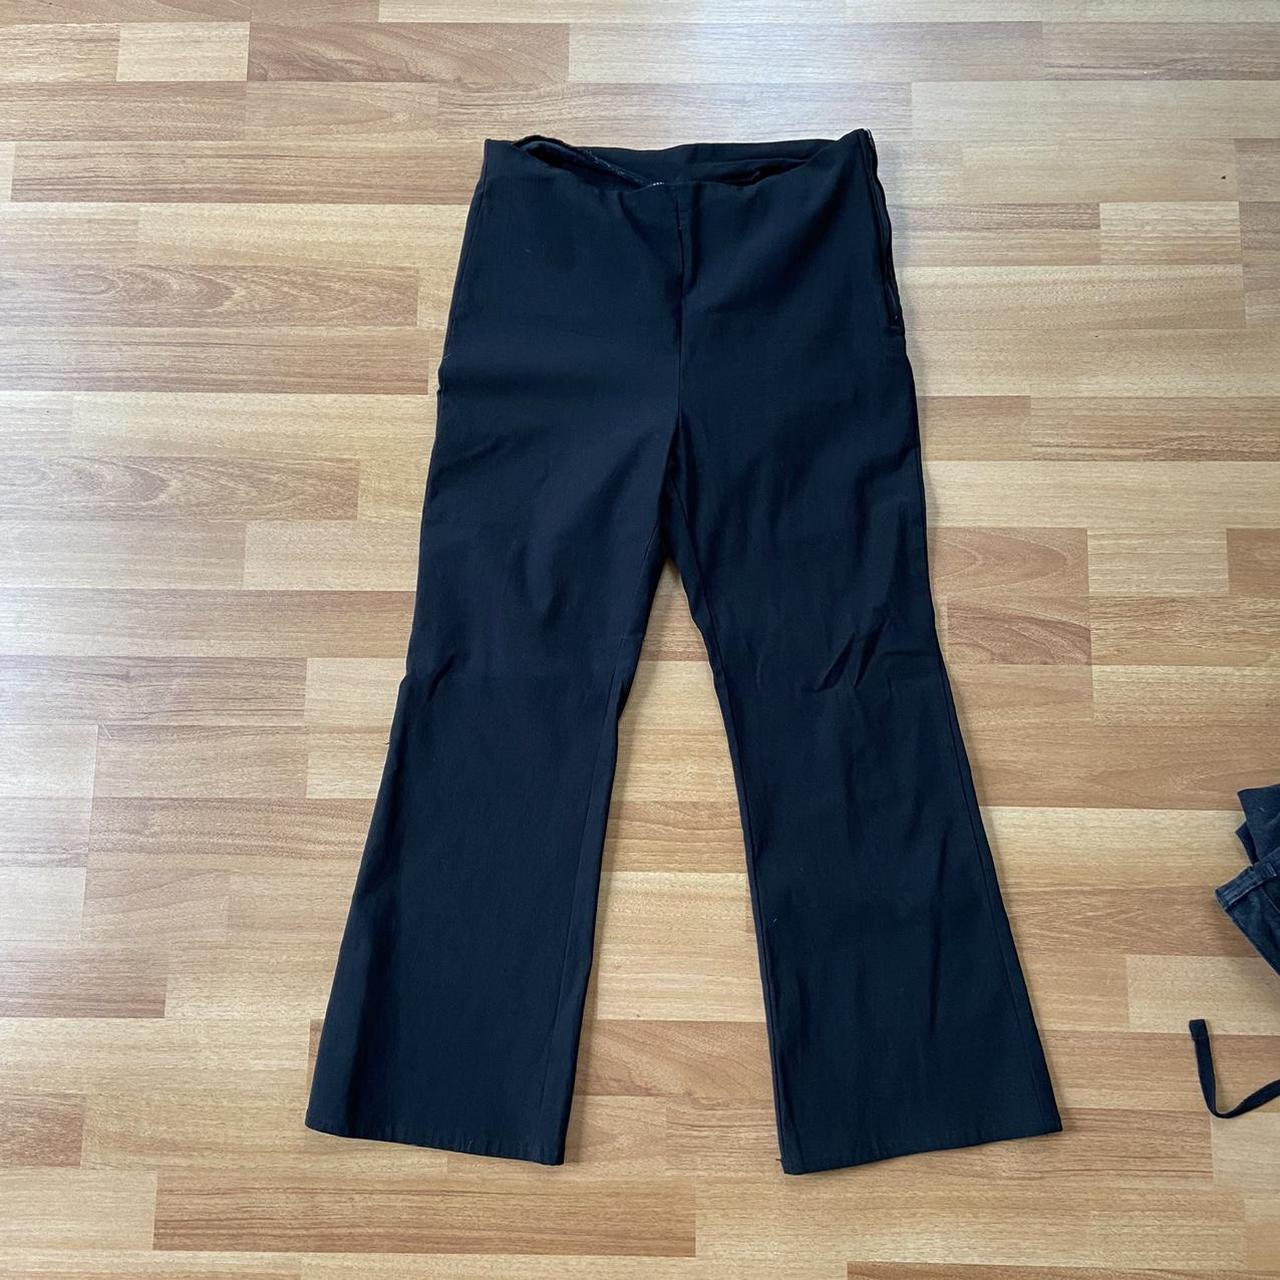 Cute H&M zip black pants, they stretch and are very... - Depop